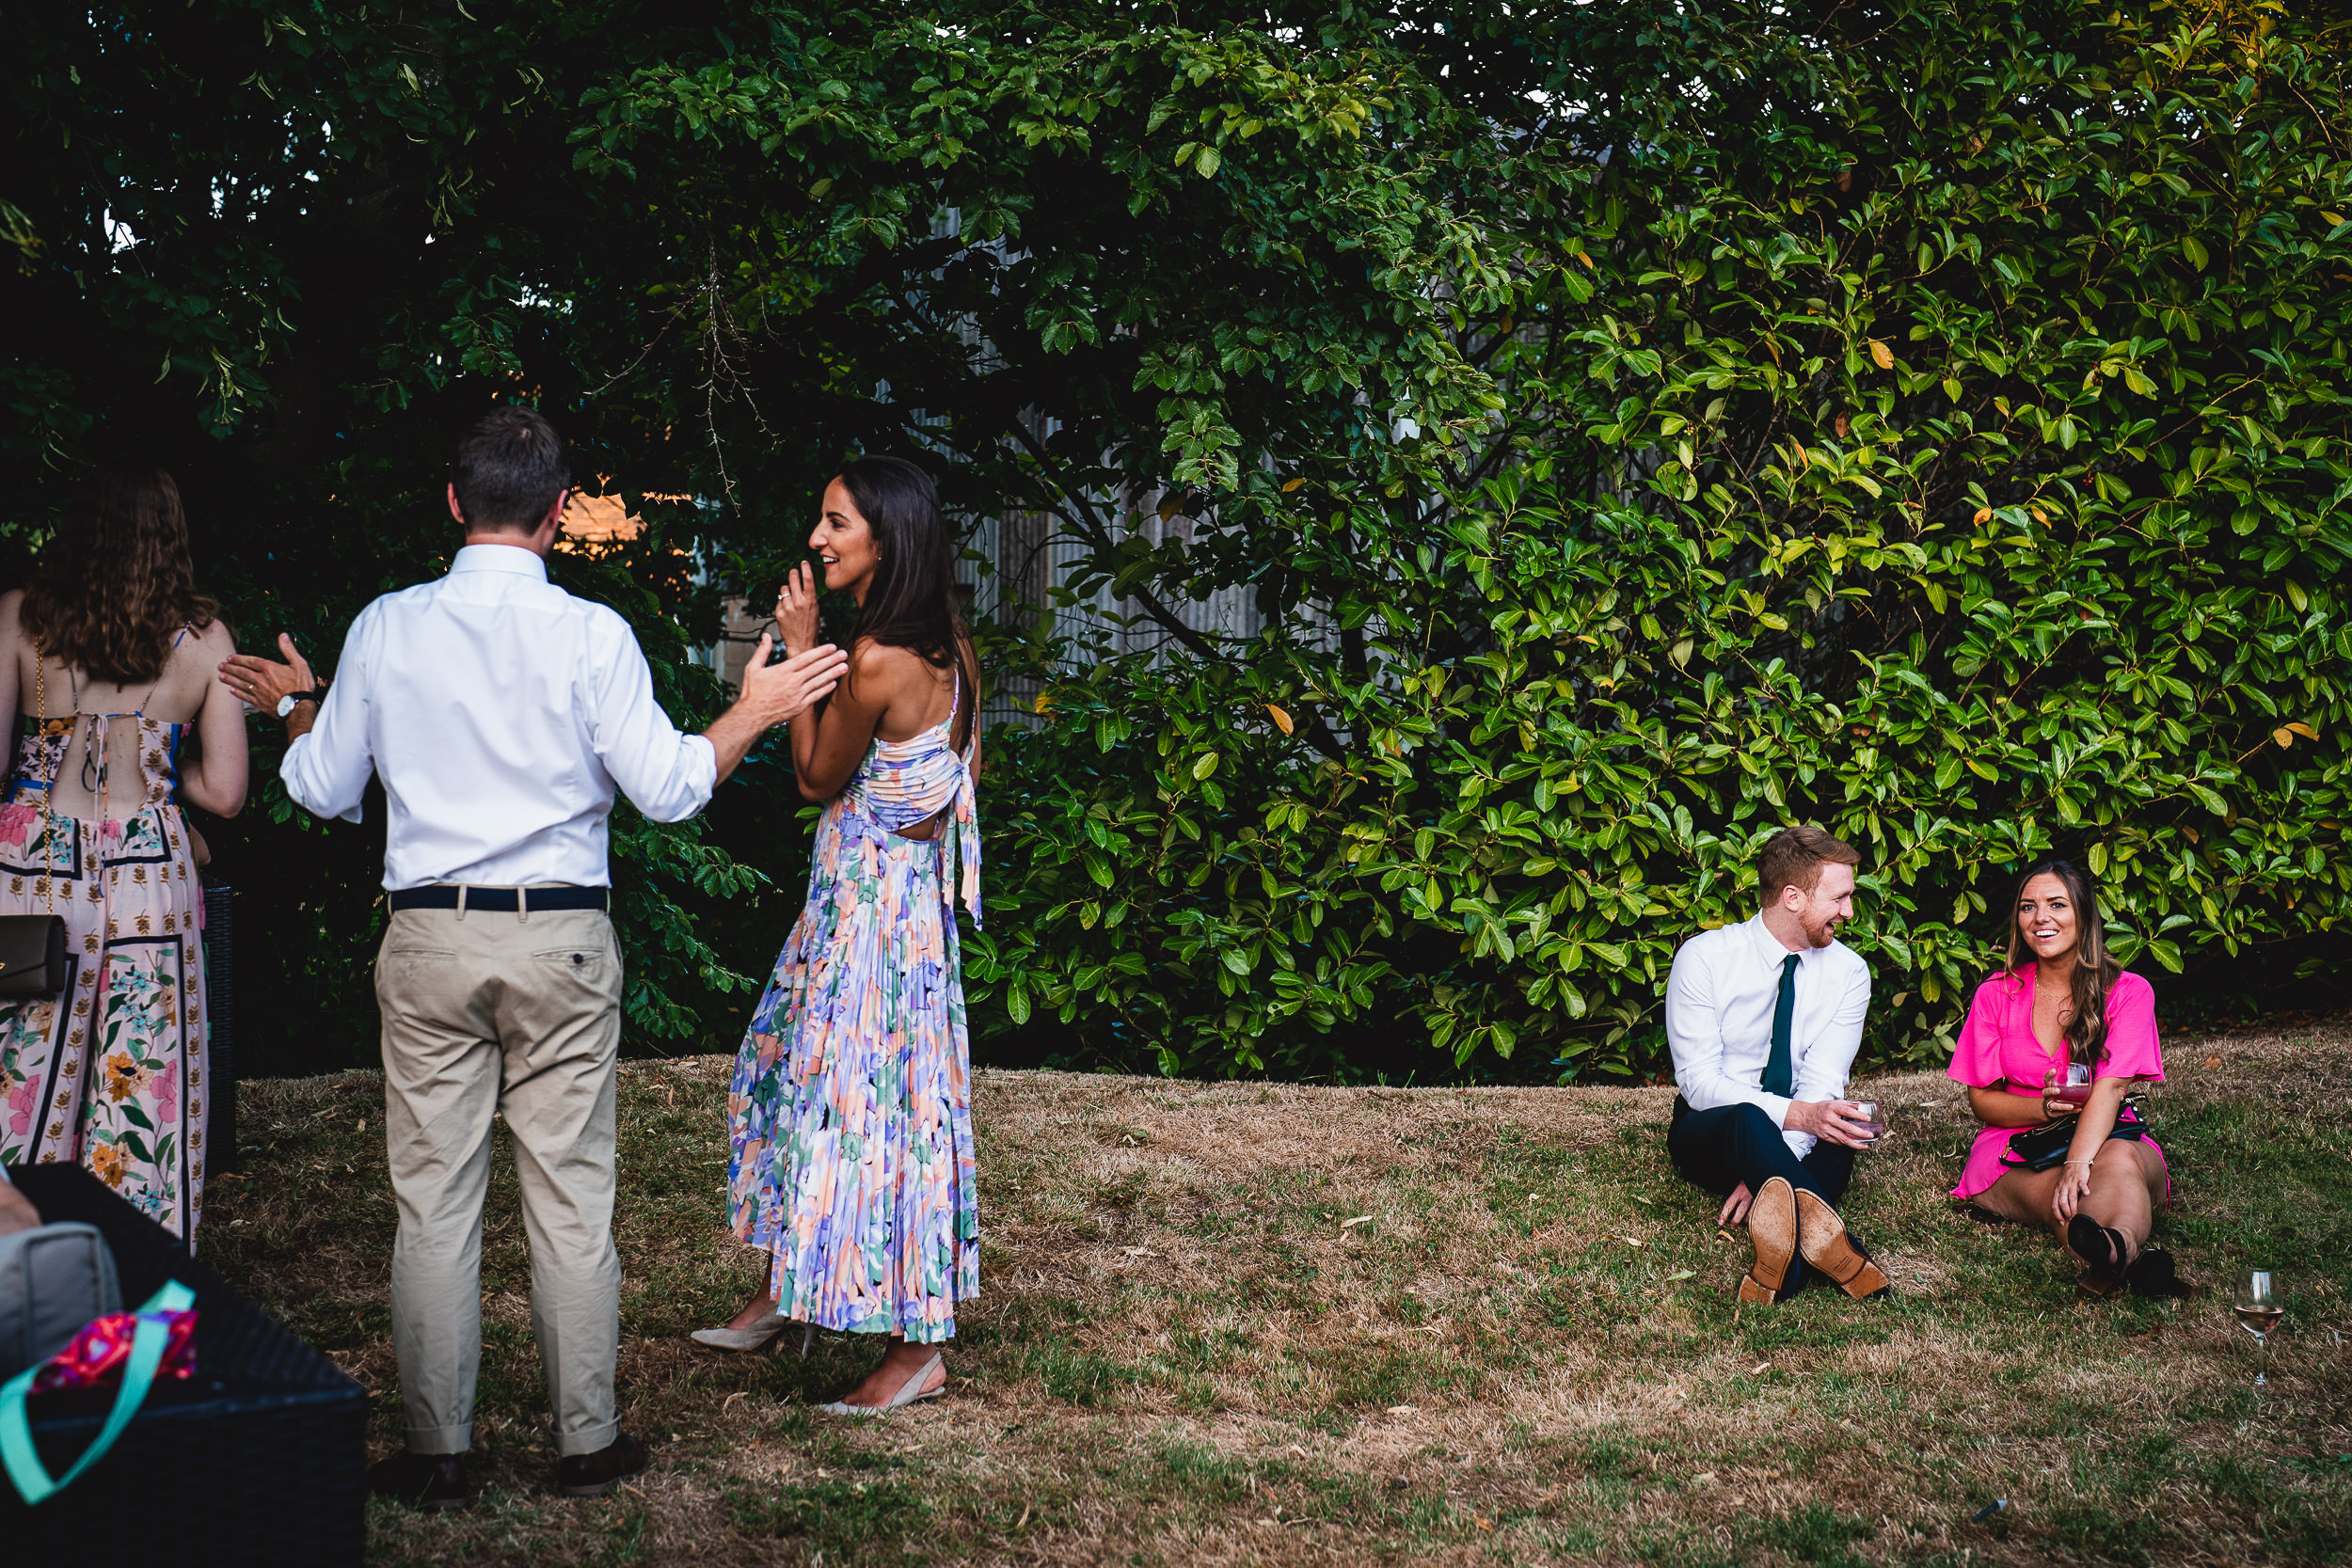 A wedding photo of a bride and the group in a grassy area.